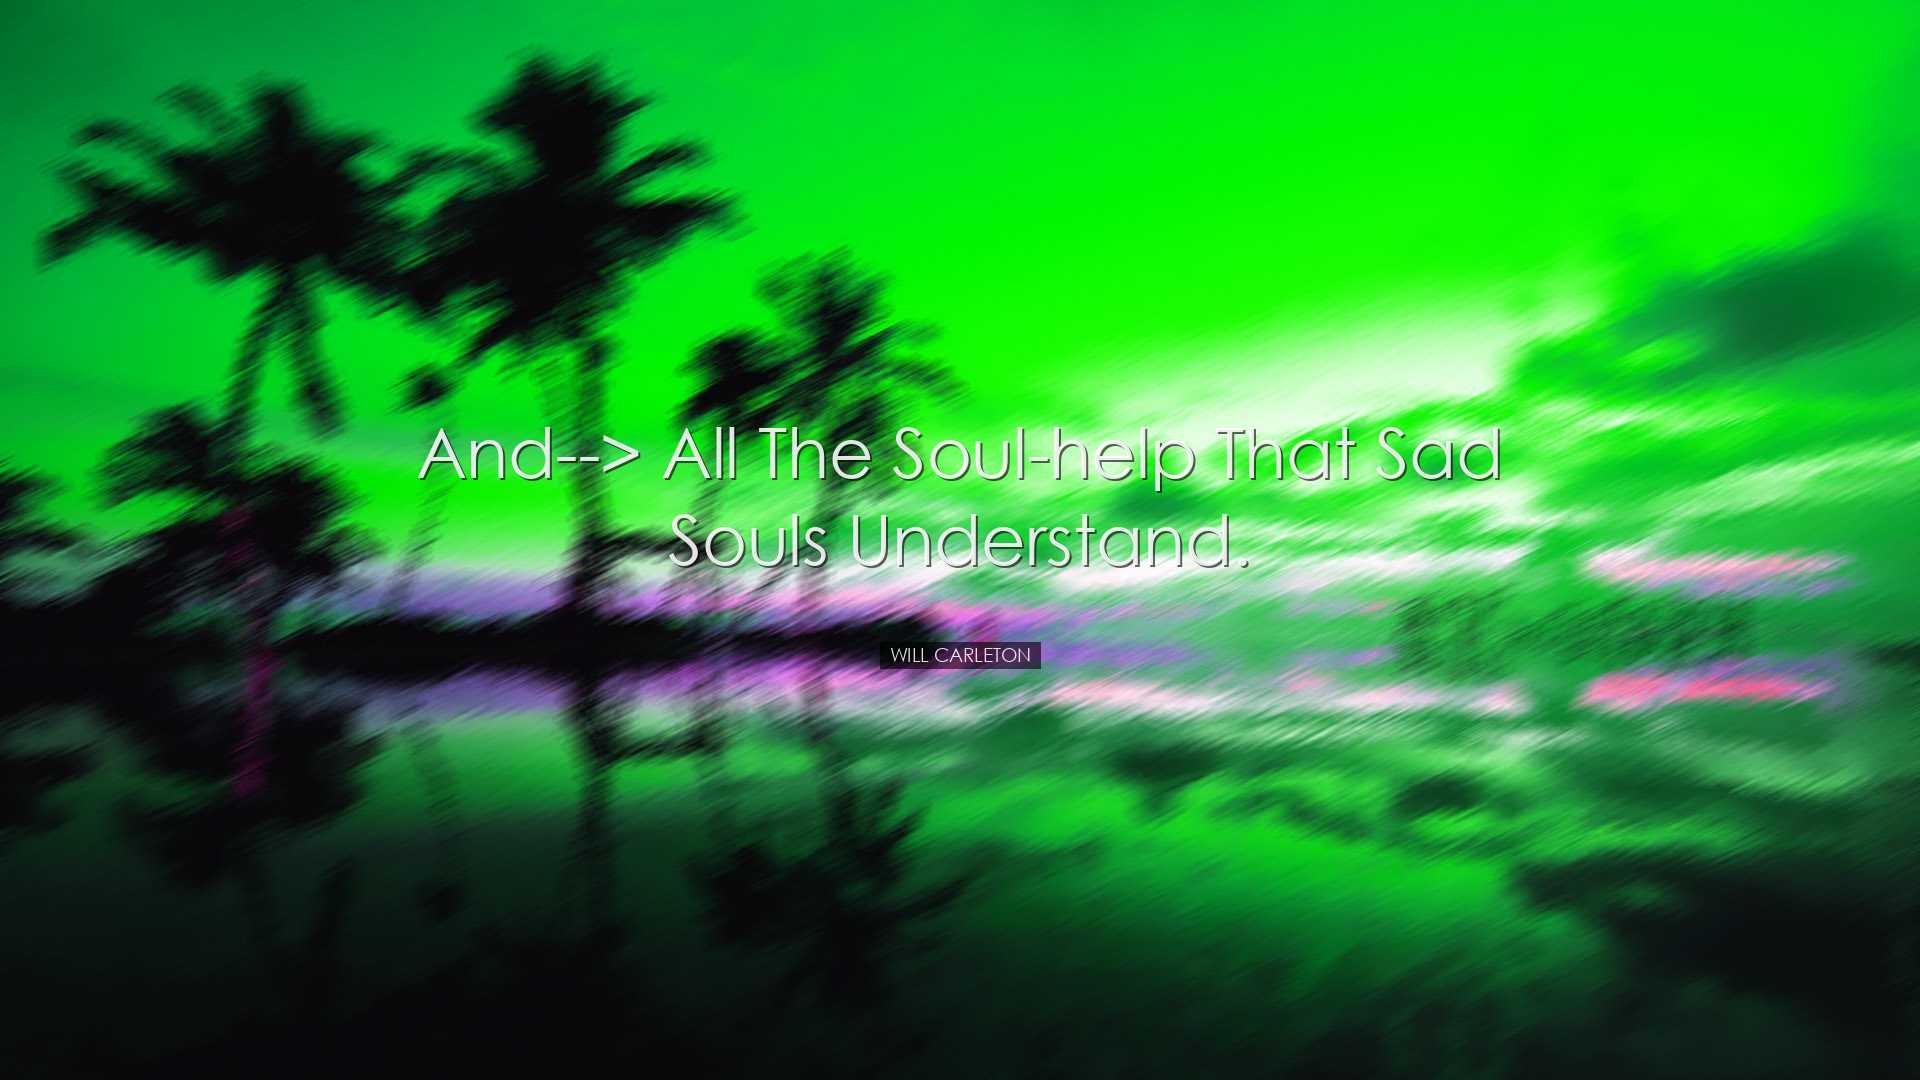 And--> all the soul-help that sad souls understand. - Will Carleto